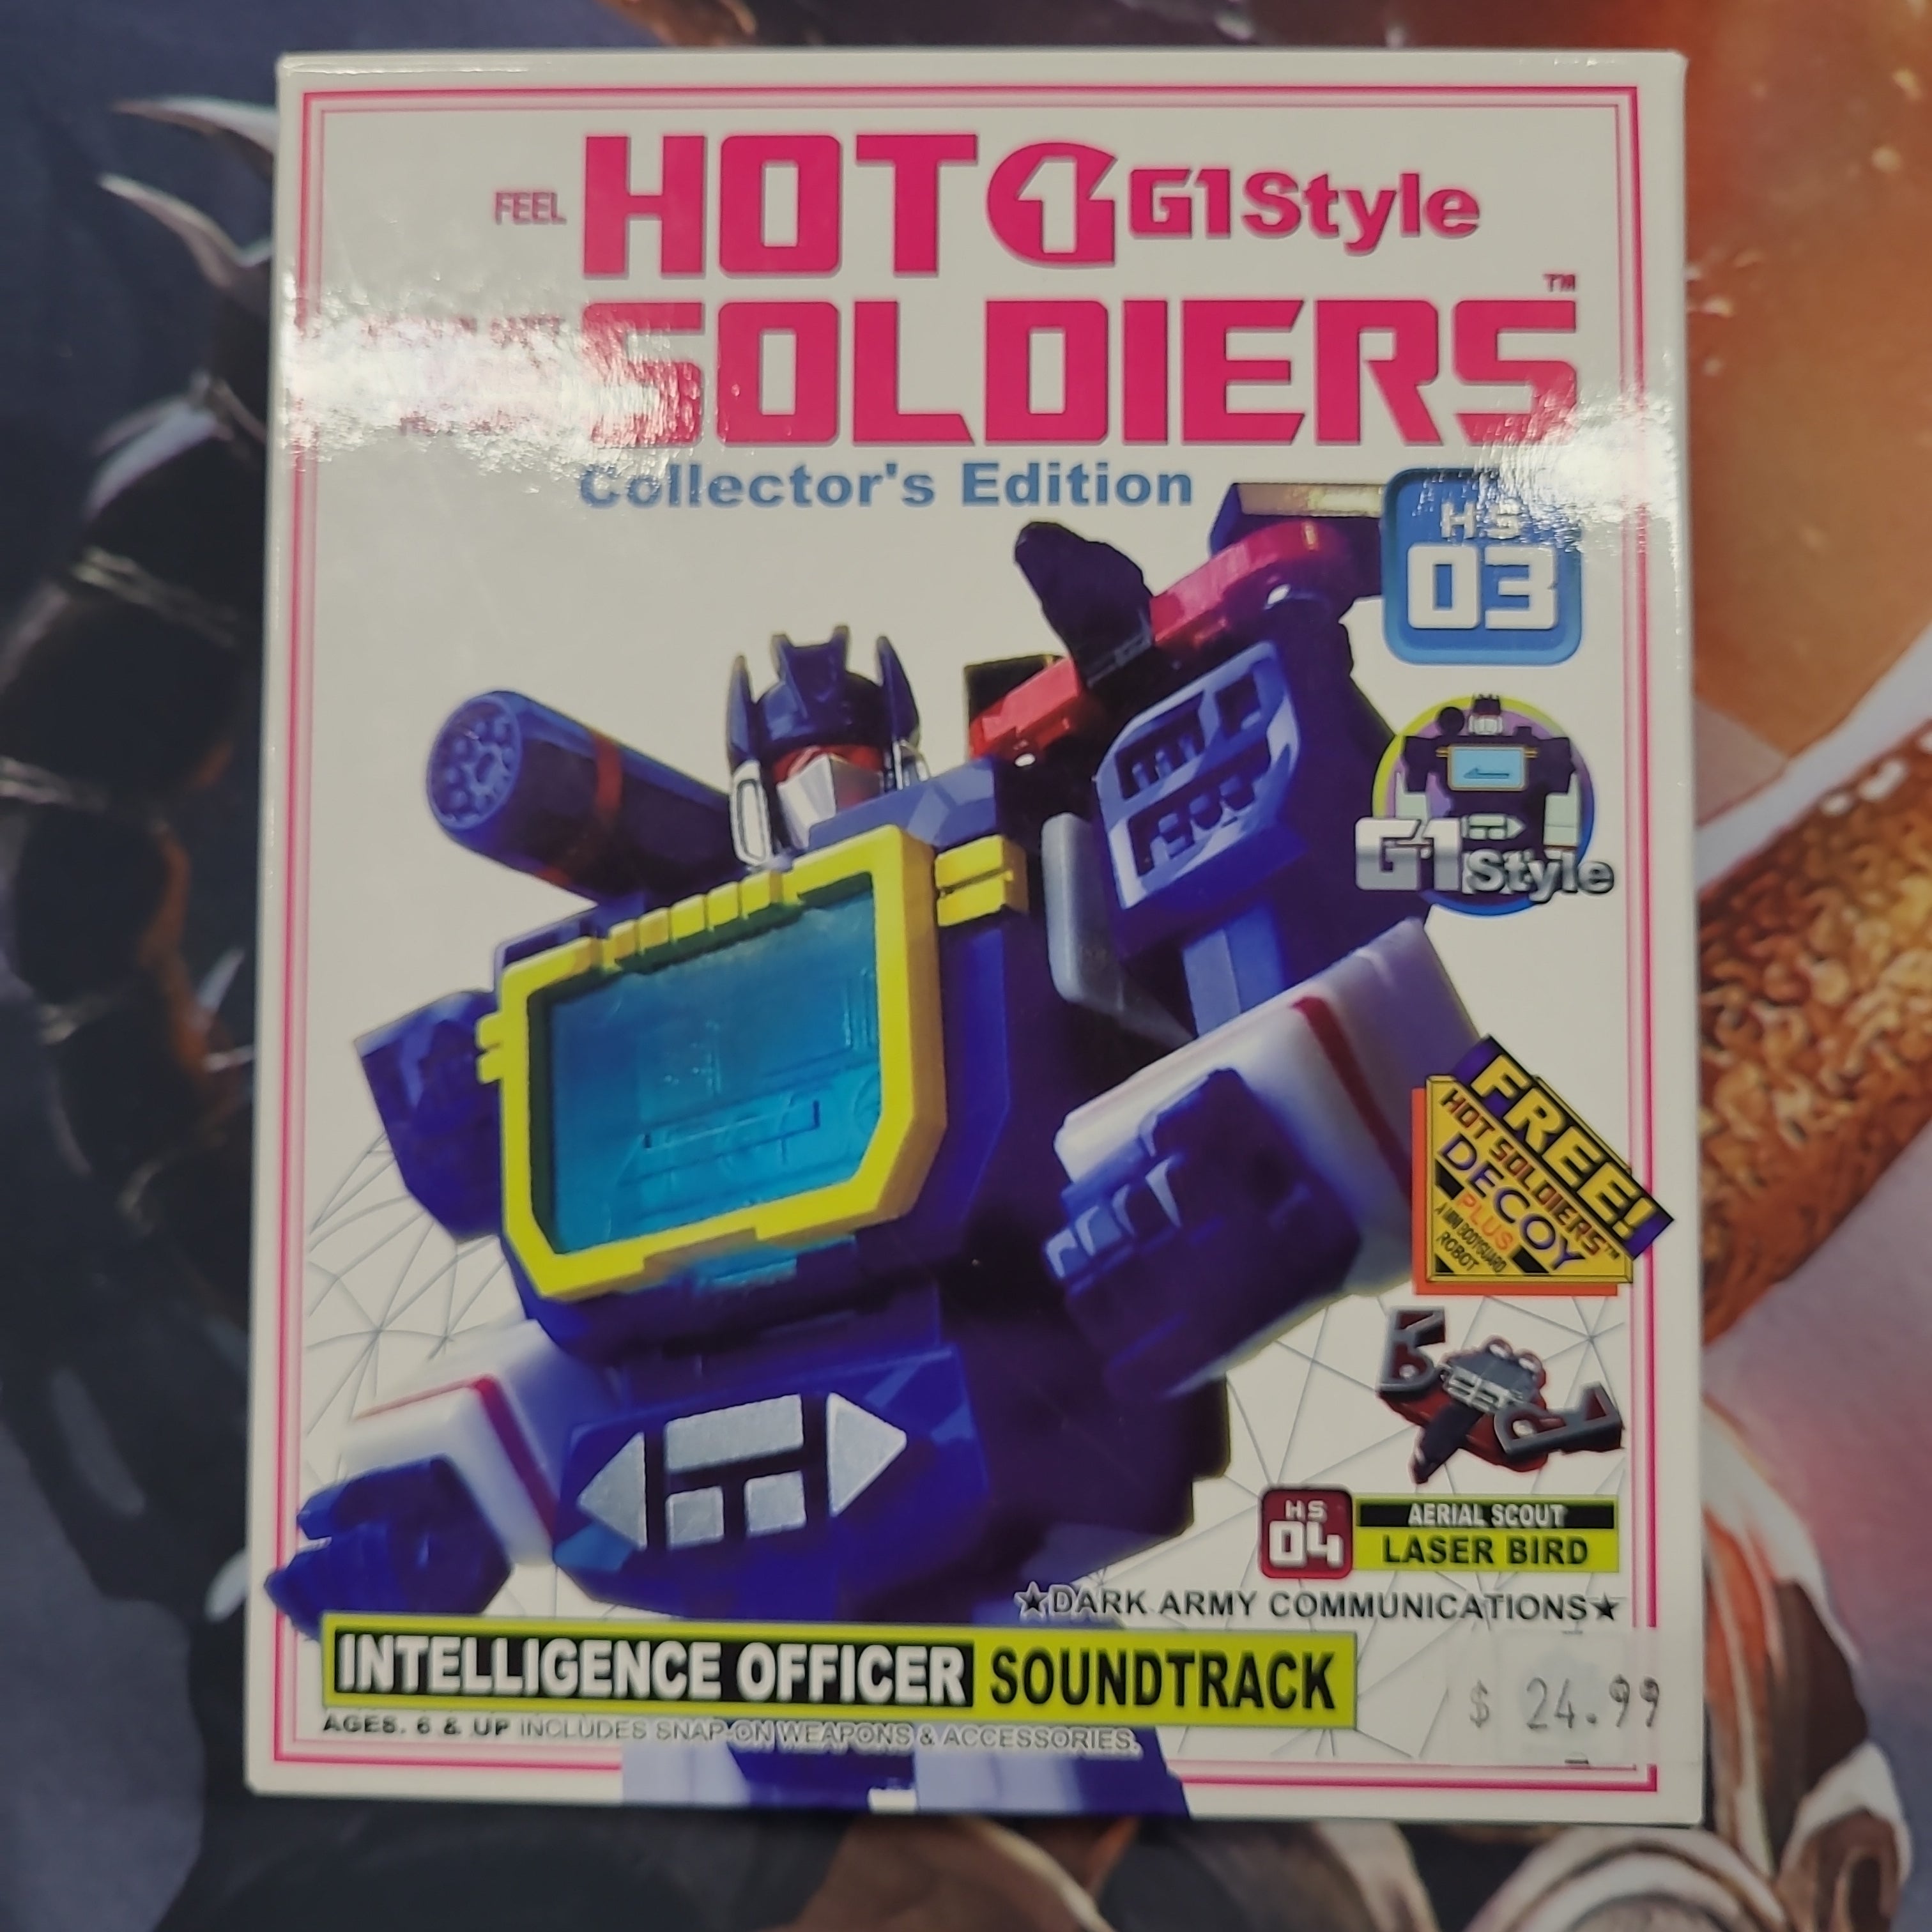 Transformers - Soundwave/Blaster Collection | All Aboard Games